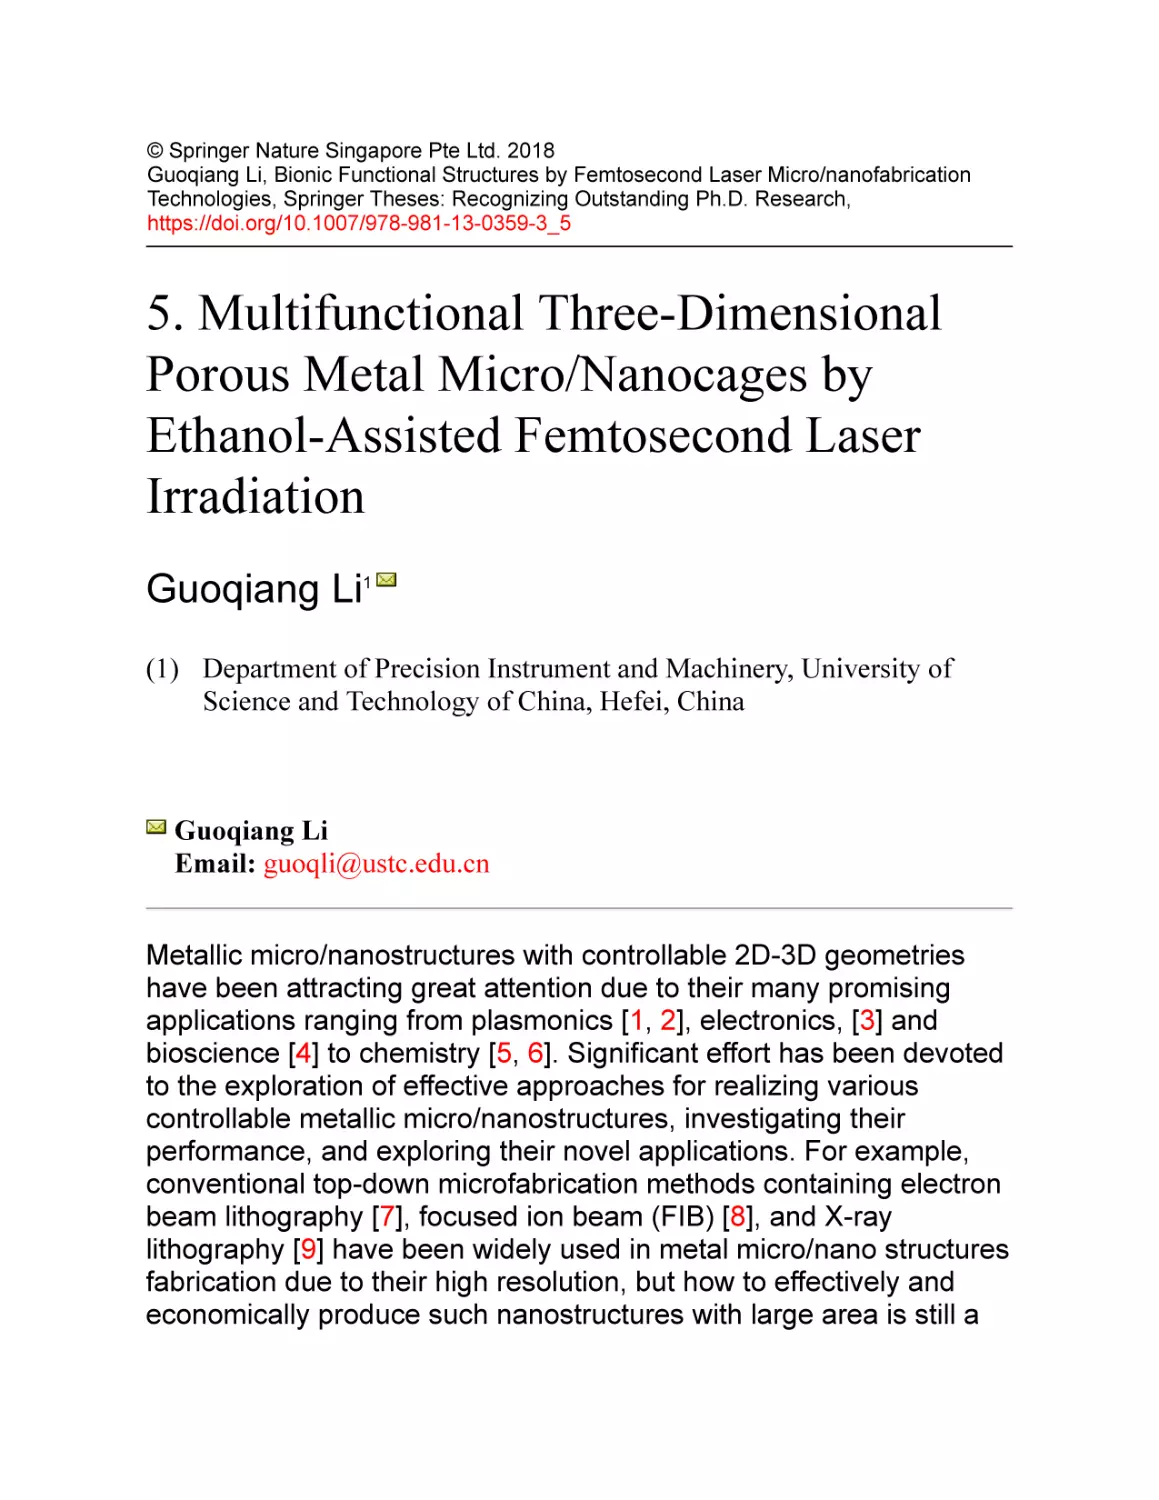 5. Multifunctional Three-Dimensional Porous Metal Micro/Nanocages by Ethanol-Assisted Femtosecond Laser Irradiation